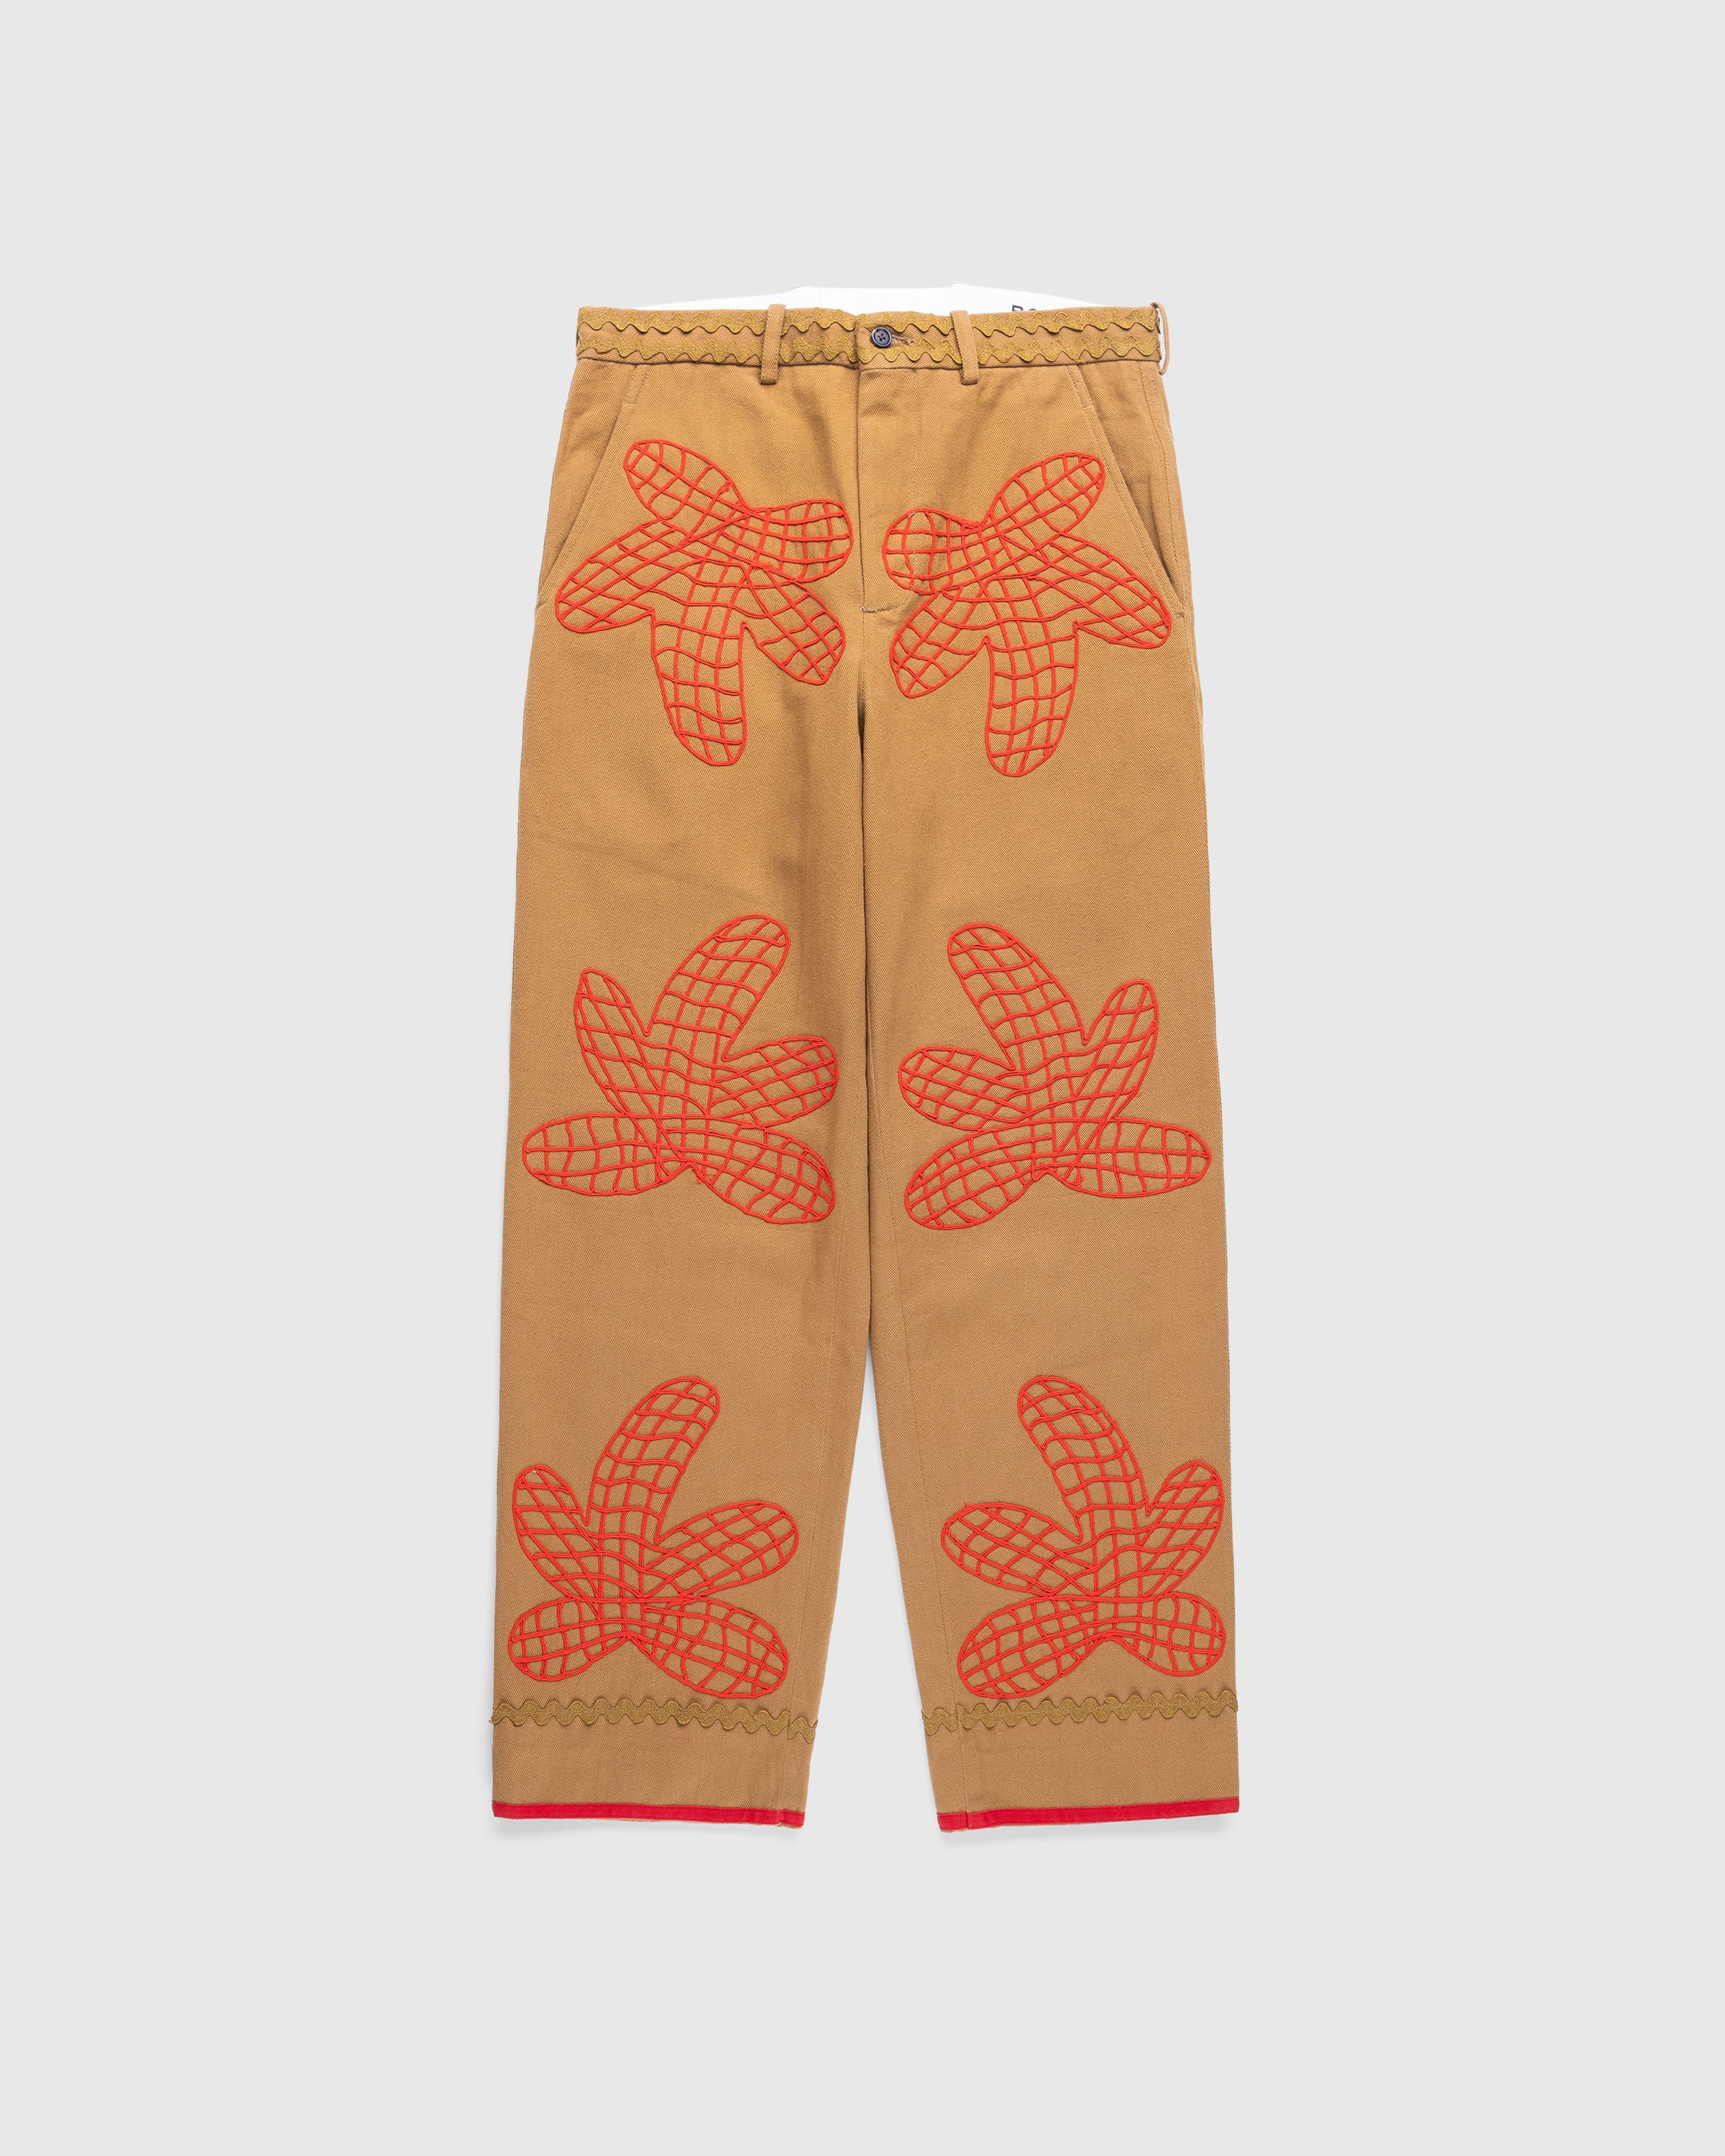 Bode - Field Maple Trousers Brown/Red - Trousers - Multi - Image 1